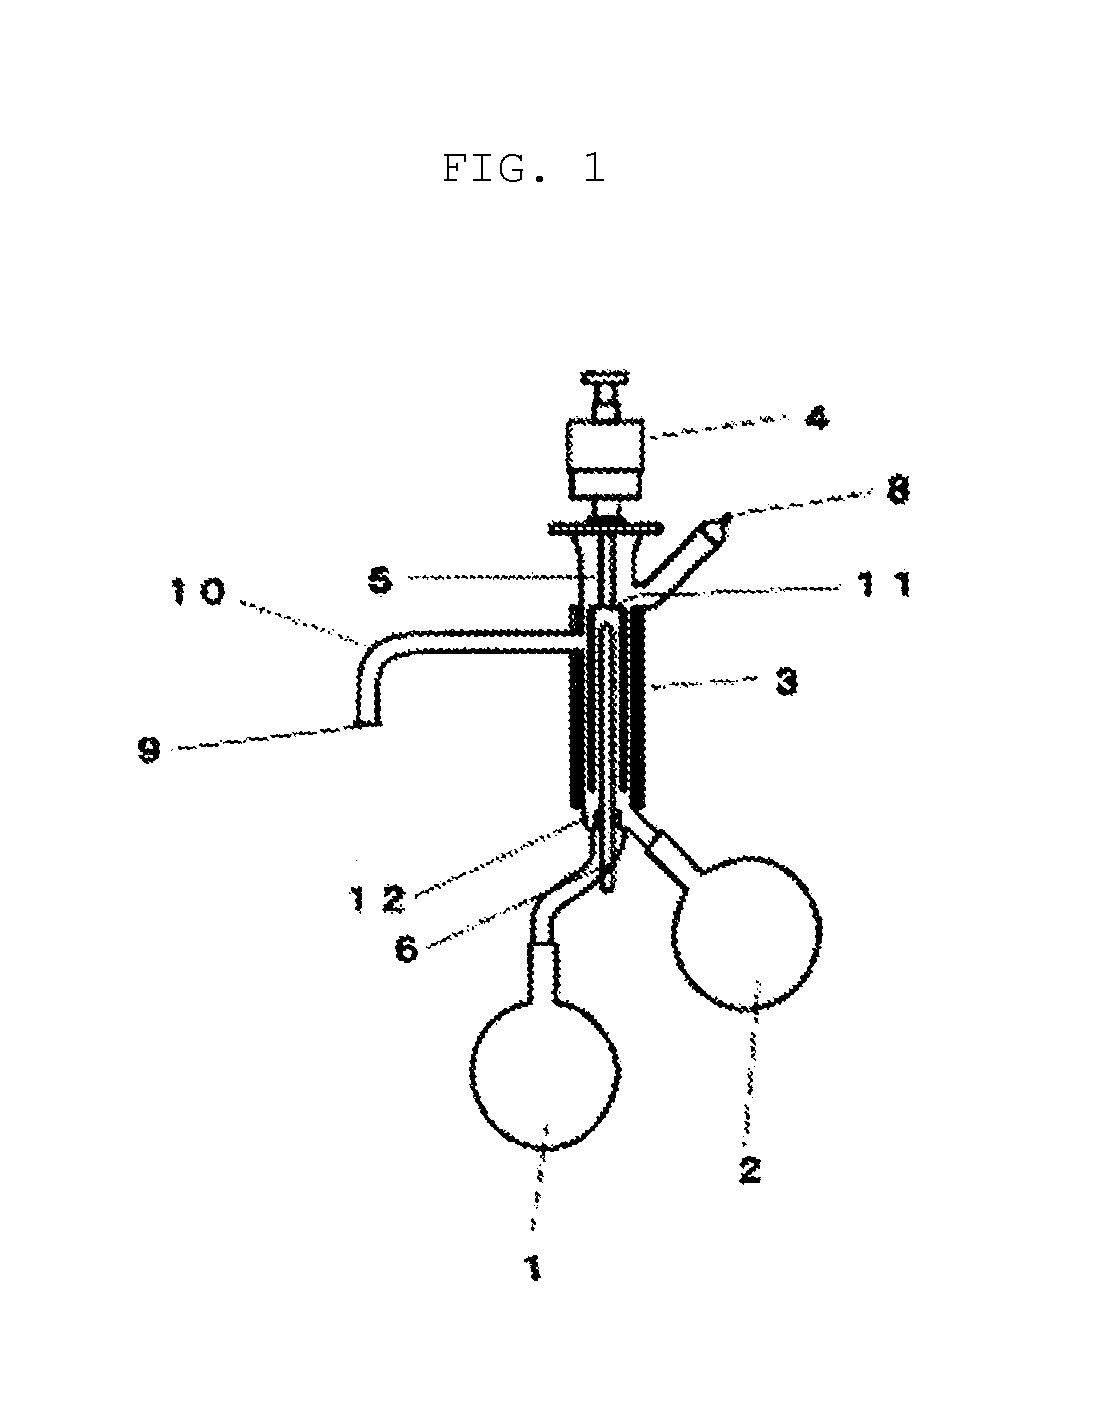 Vinyl sulfonic acid, polymer thereof, and production method thereof